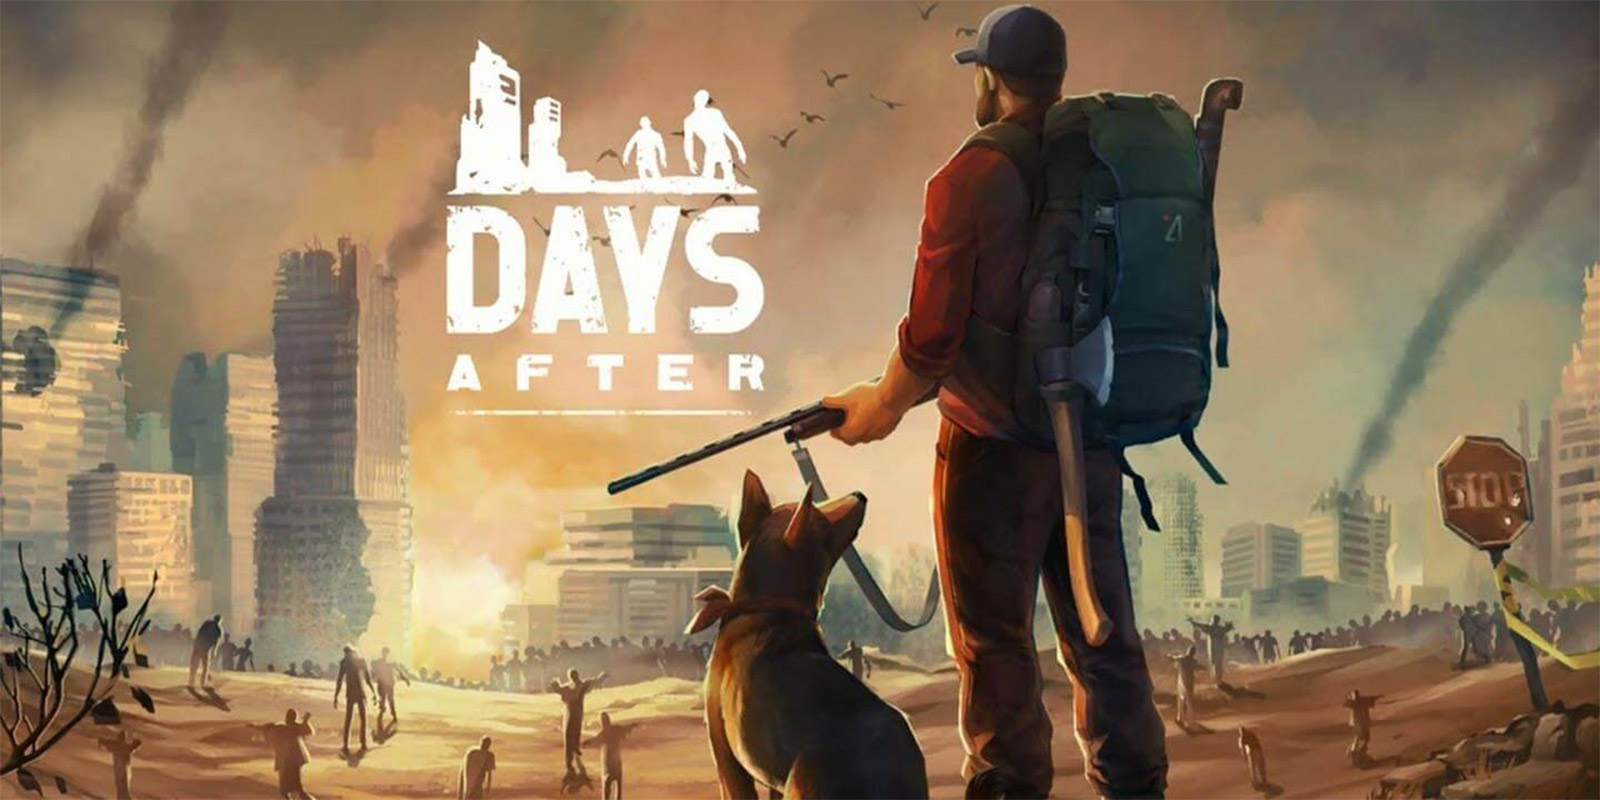 Afk zombie apocalypse game global. Days after игра. Days after зомби апокалипсис. Days after Zombie Survival. Day after Day игра.